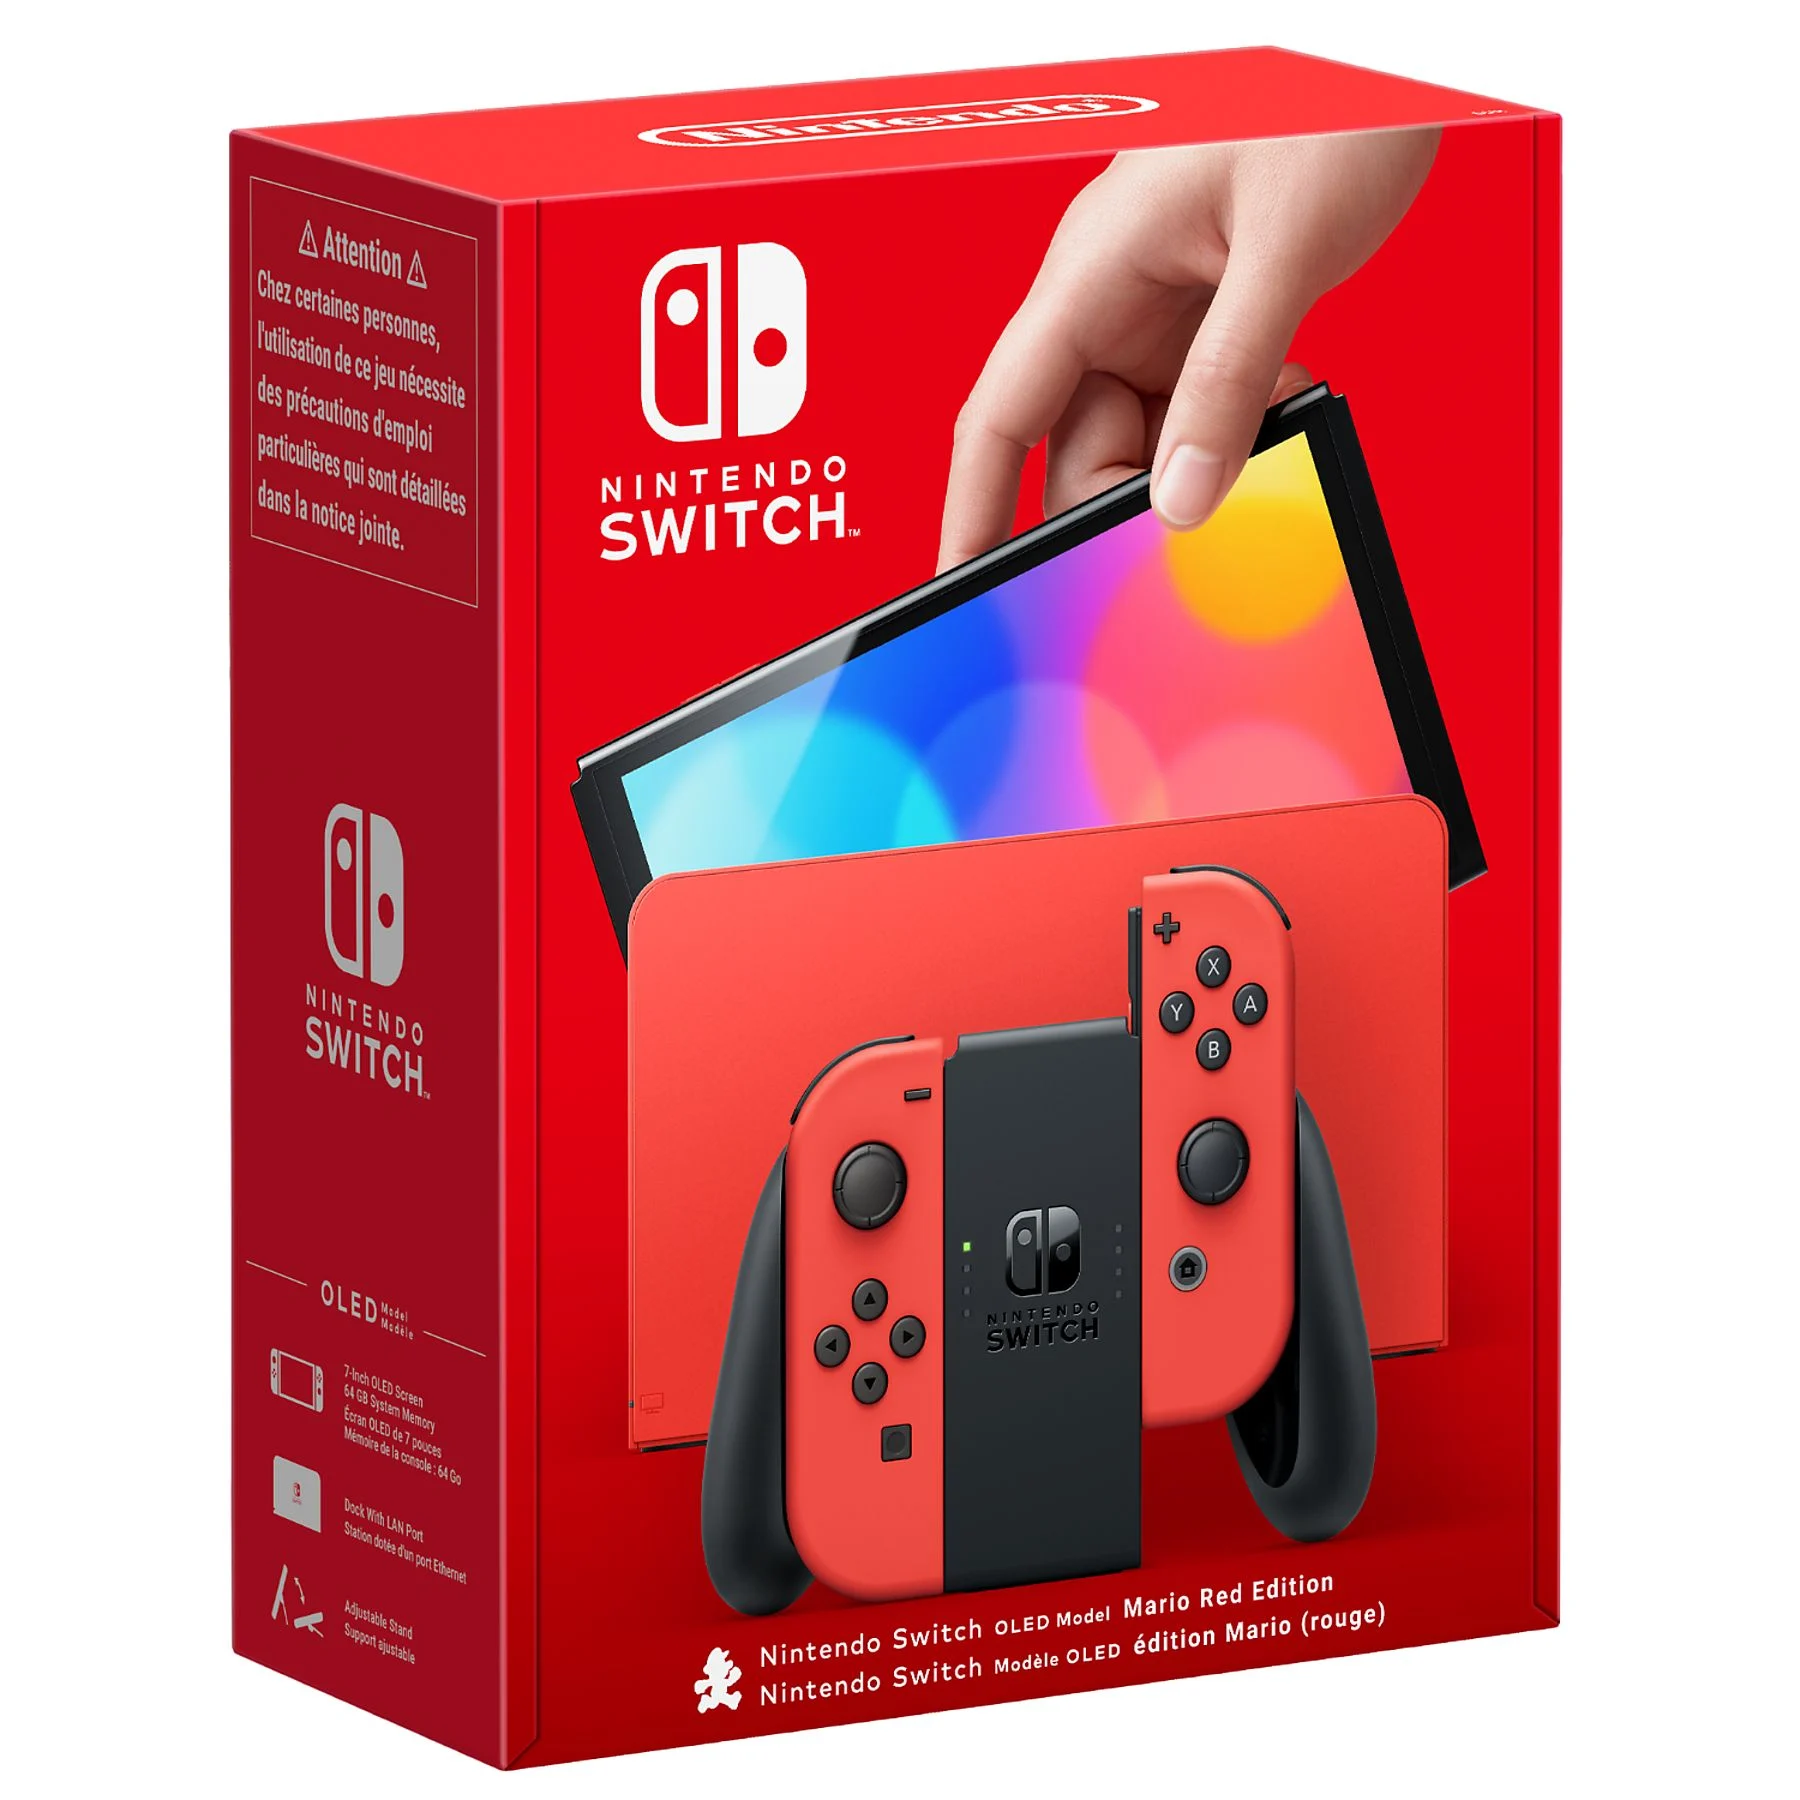 Nintendo Switch Console (OLED-Model) Mario Red Edition (Switch), Nintendo